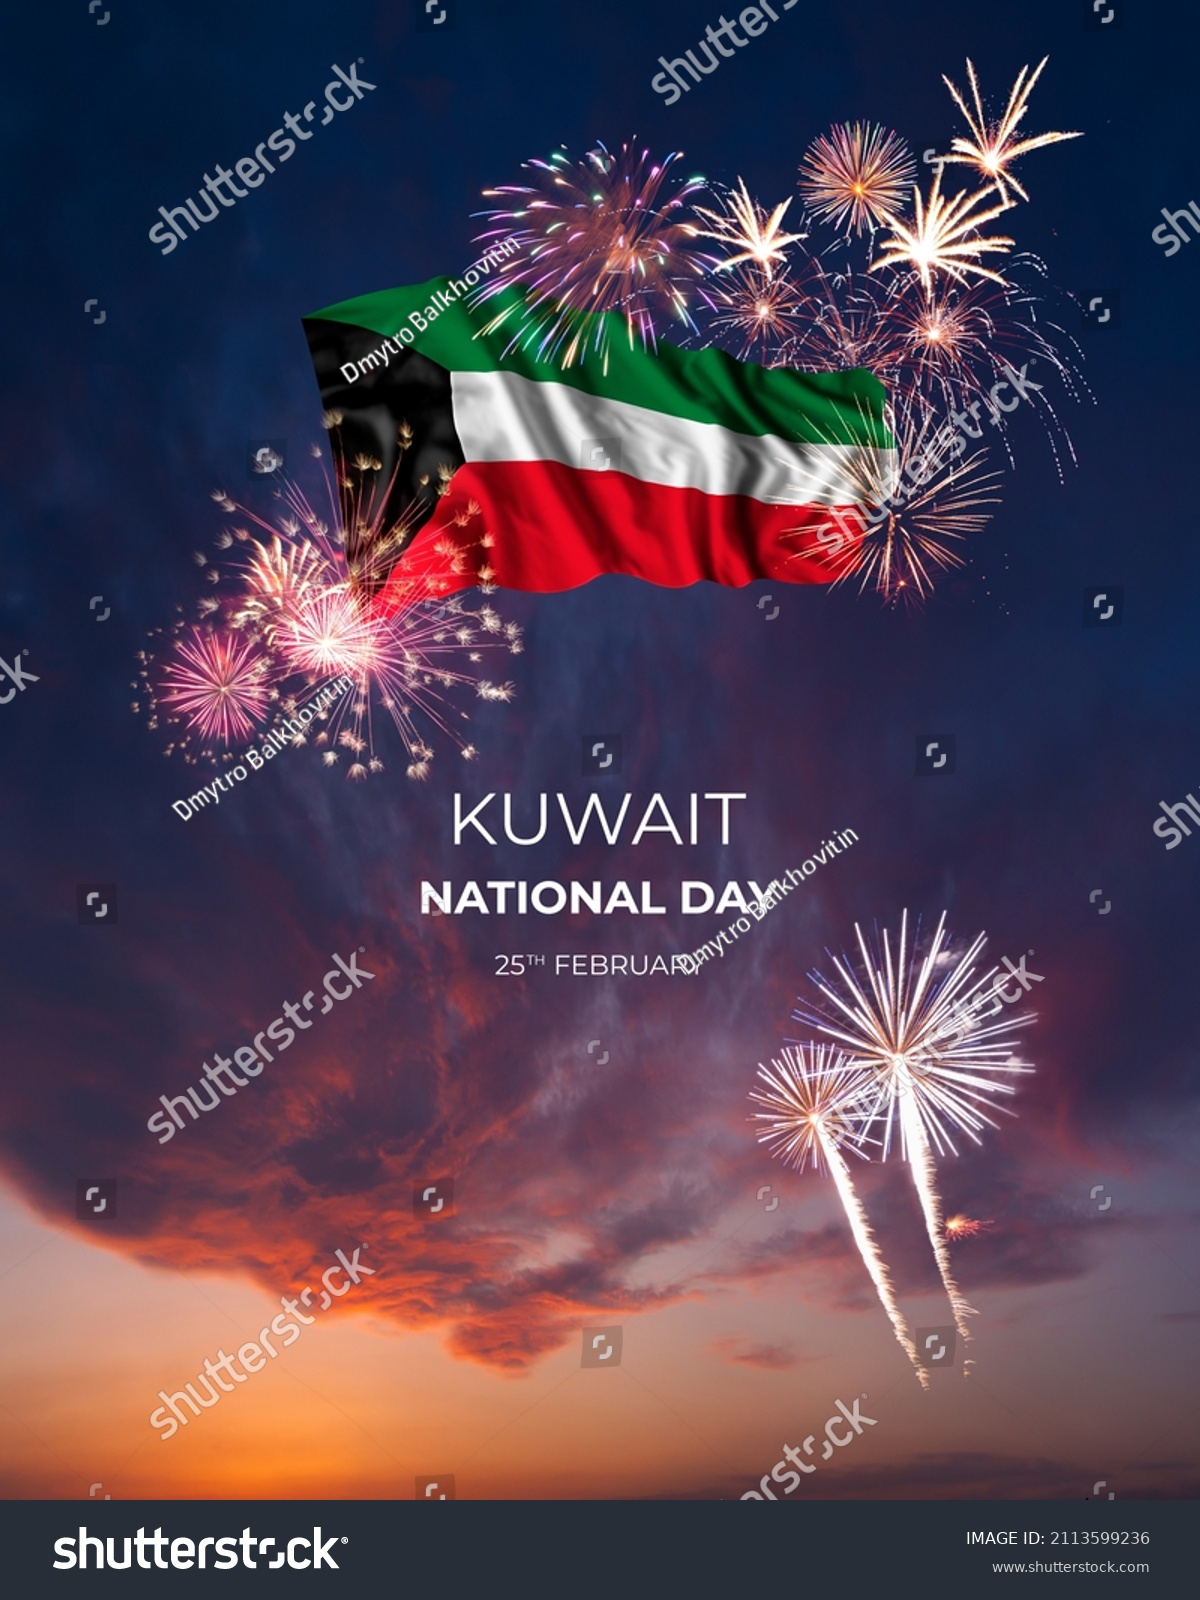 Evening sky with majestic fireworks and flag of Kuwait on National holiday #2113599236